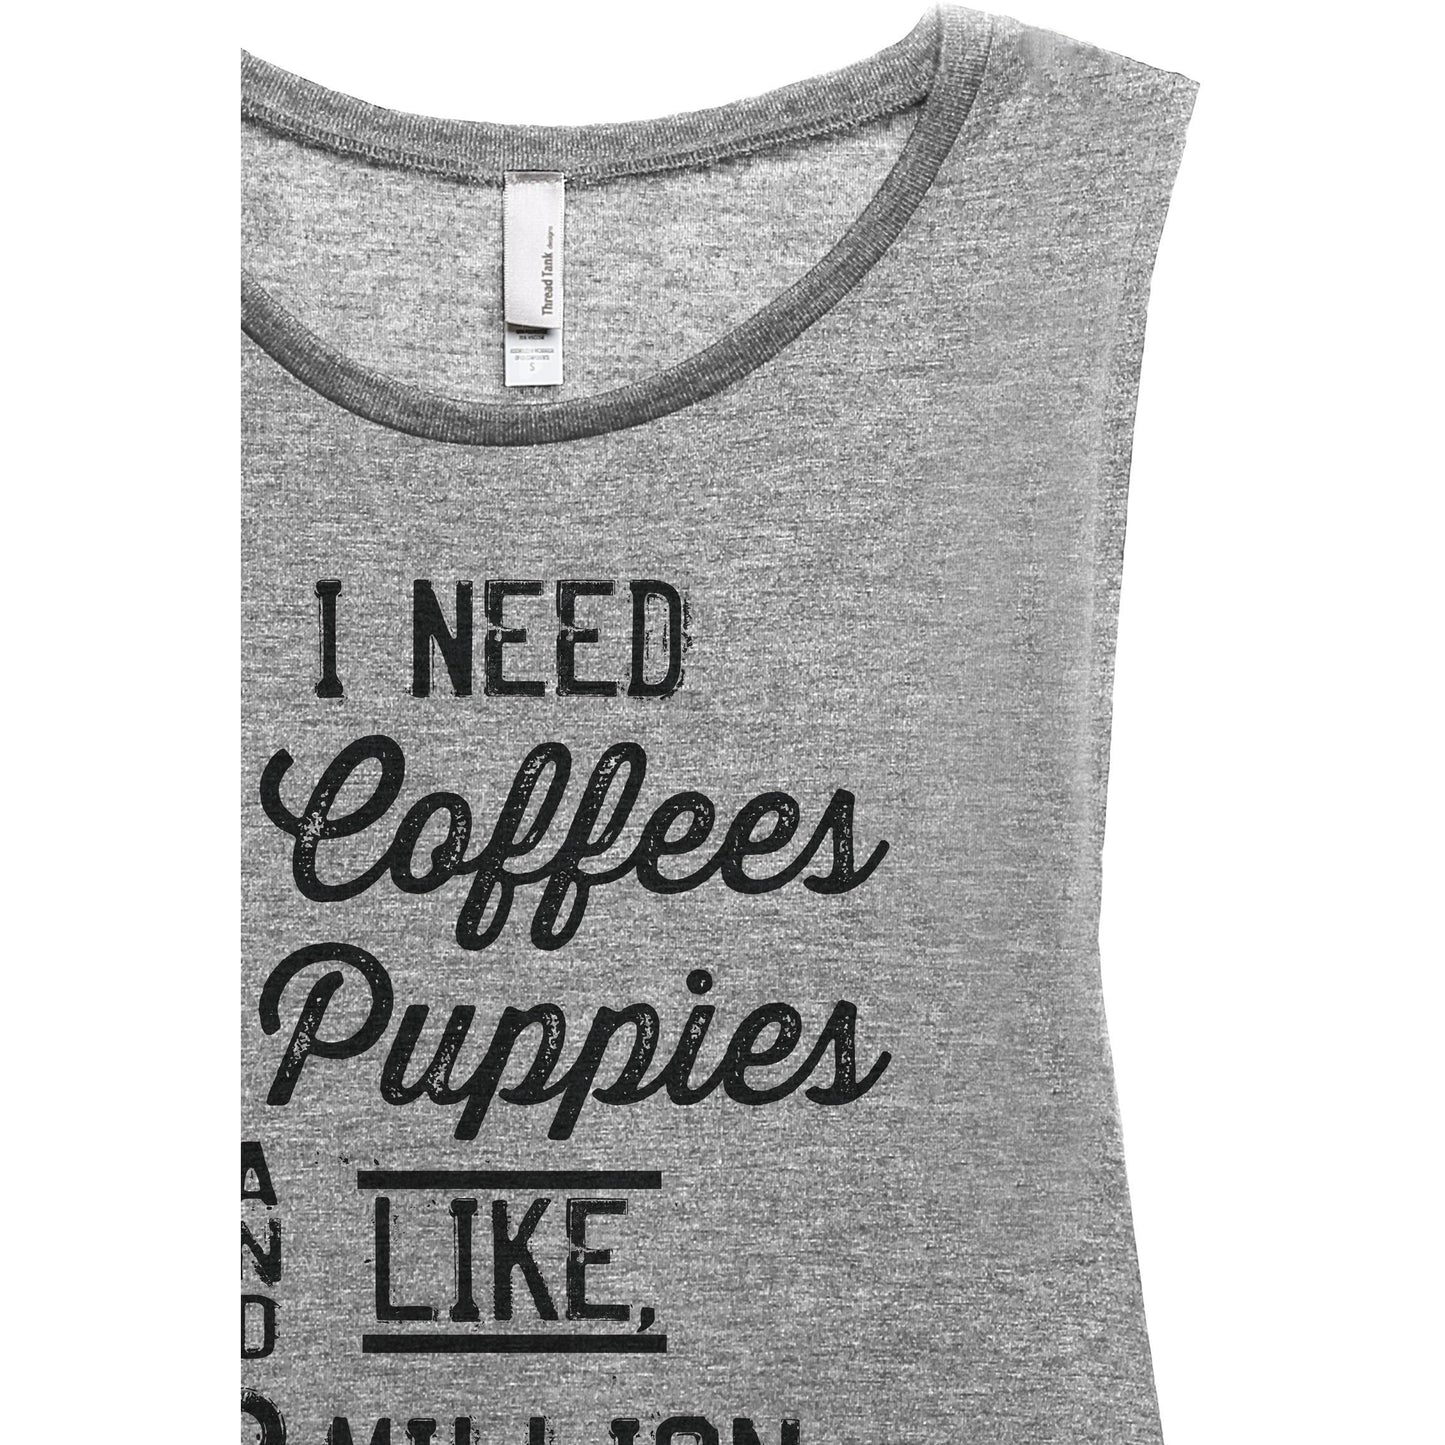 3 Coffees 6 Puppies Million Dollars Women's Relaxed Muscle Tank Tee Heather Grey Closeup Details
